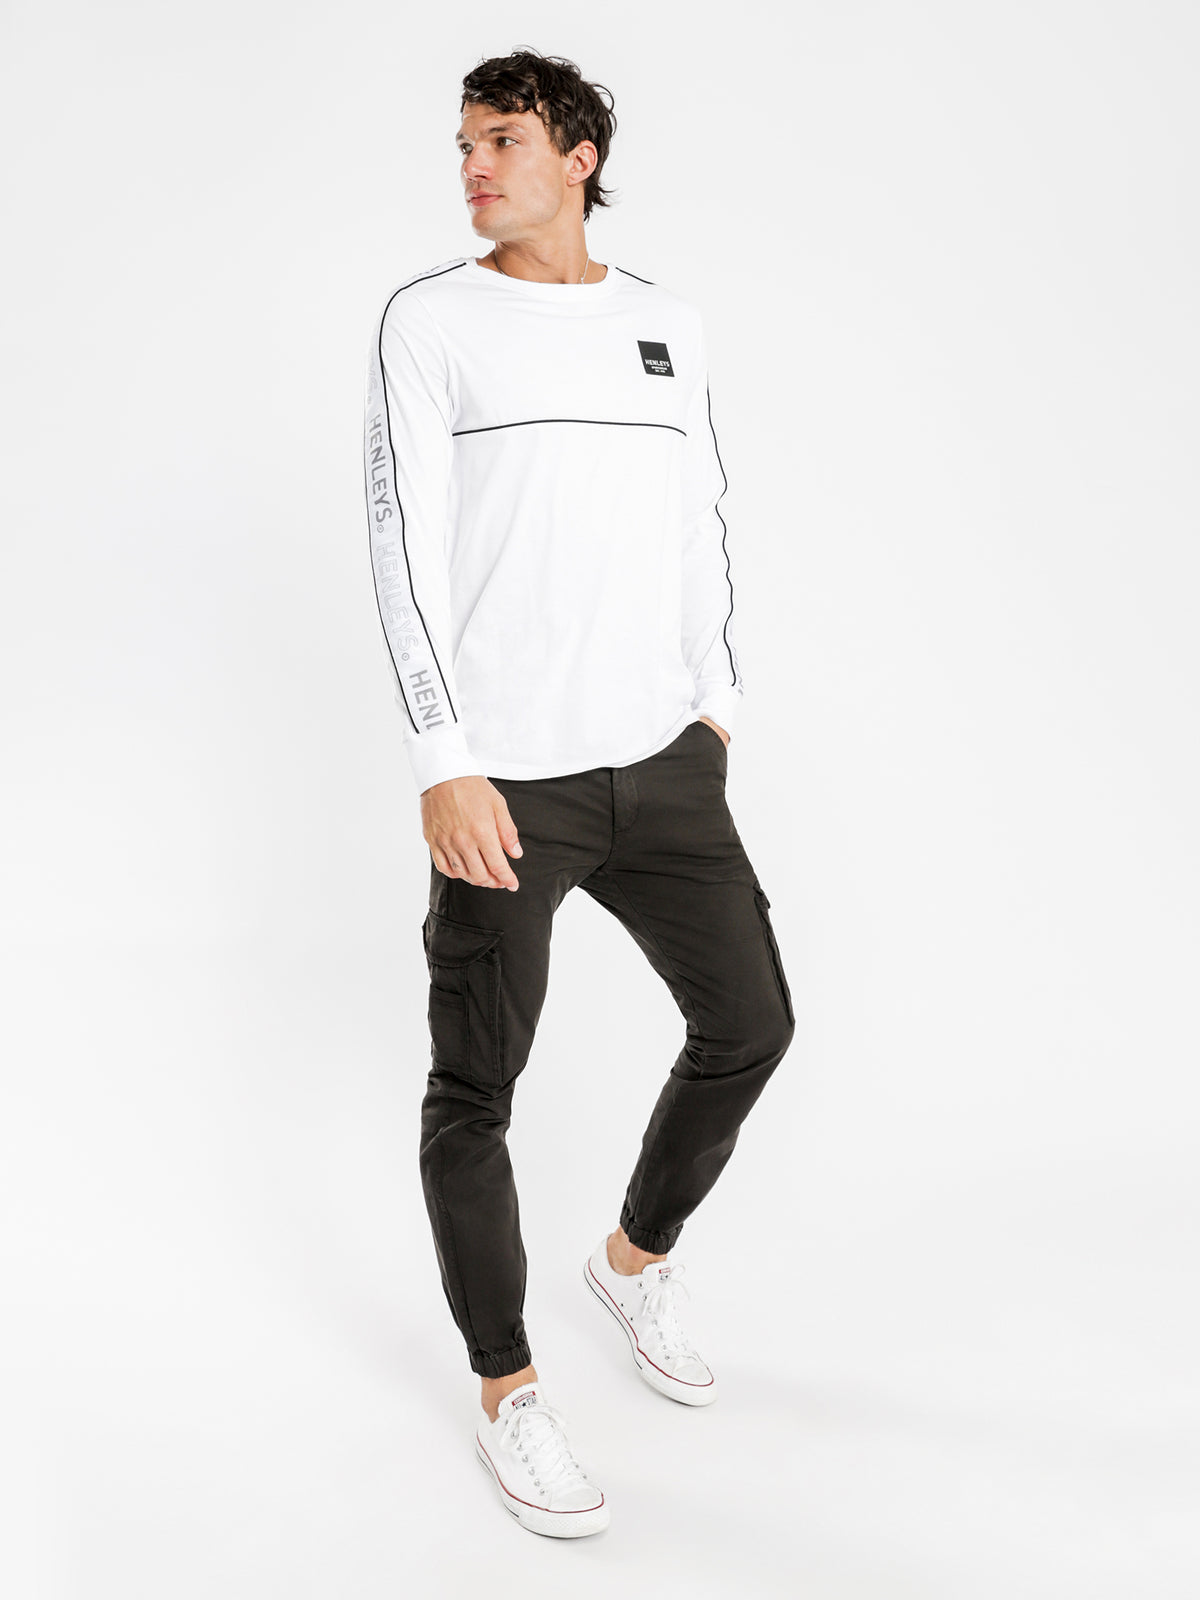 Patton Long Sleeve T-Shirt in White